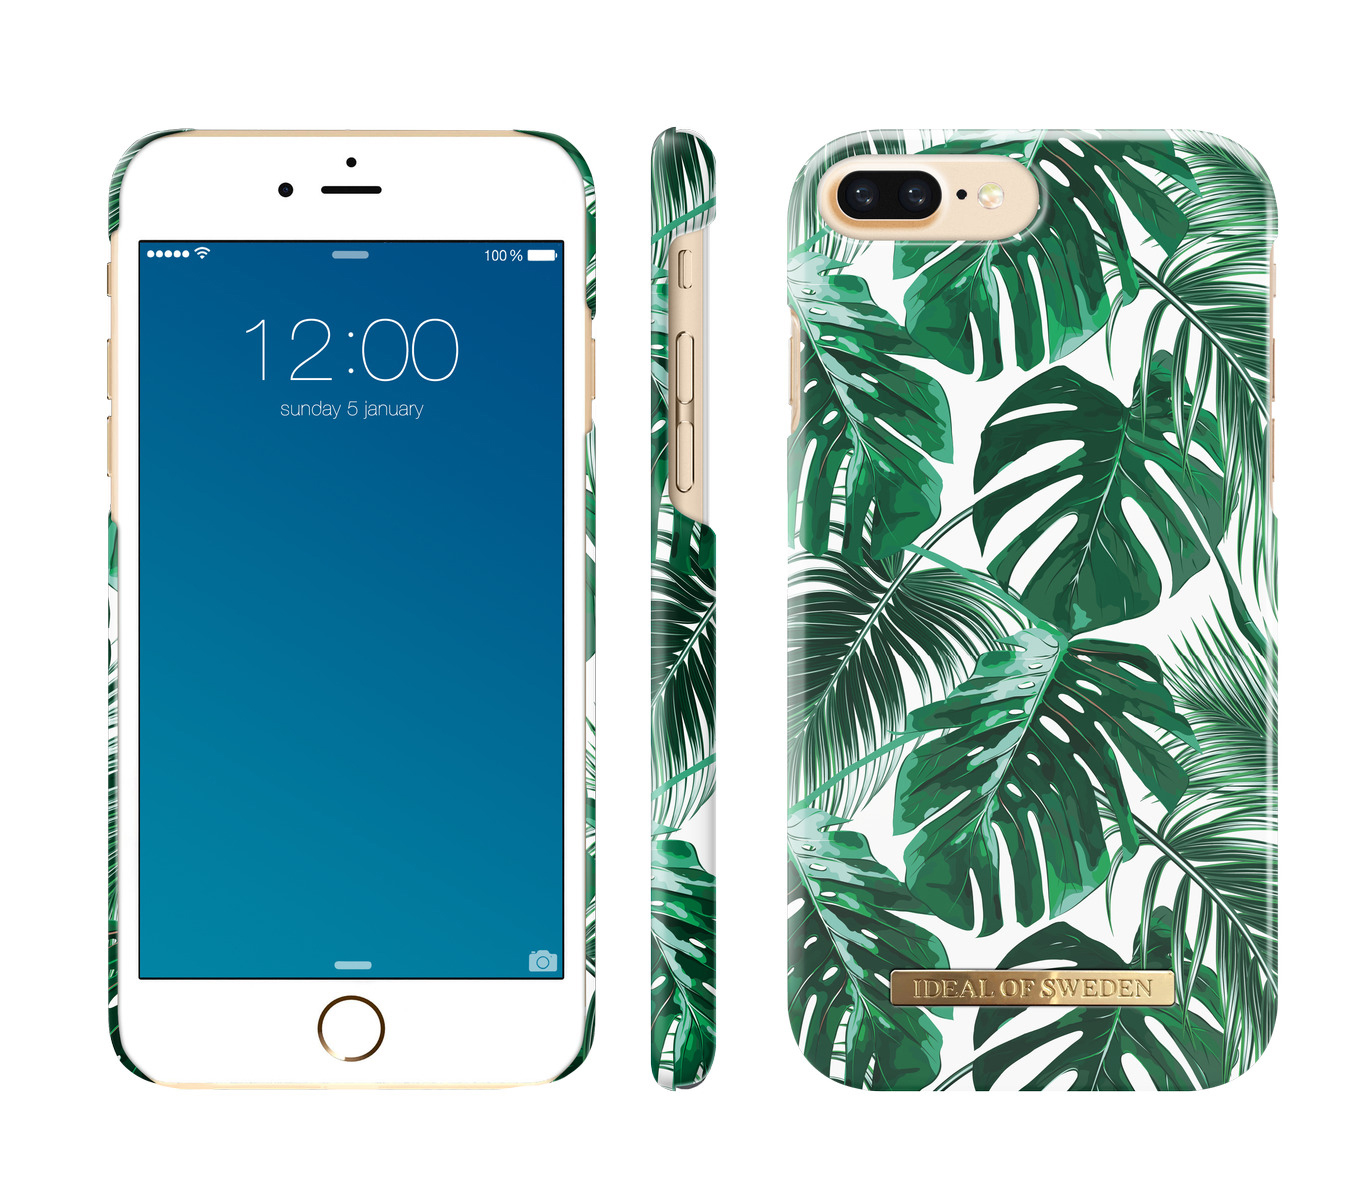 Plus Fashion, Apple, Backcover, iPhone Plus, OF ,iPhone Monstera iPhone 7 Jungle IDEAL Plus, SWEDEN 6 8